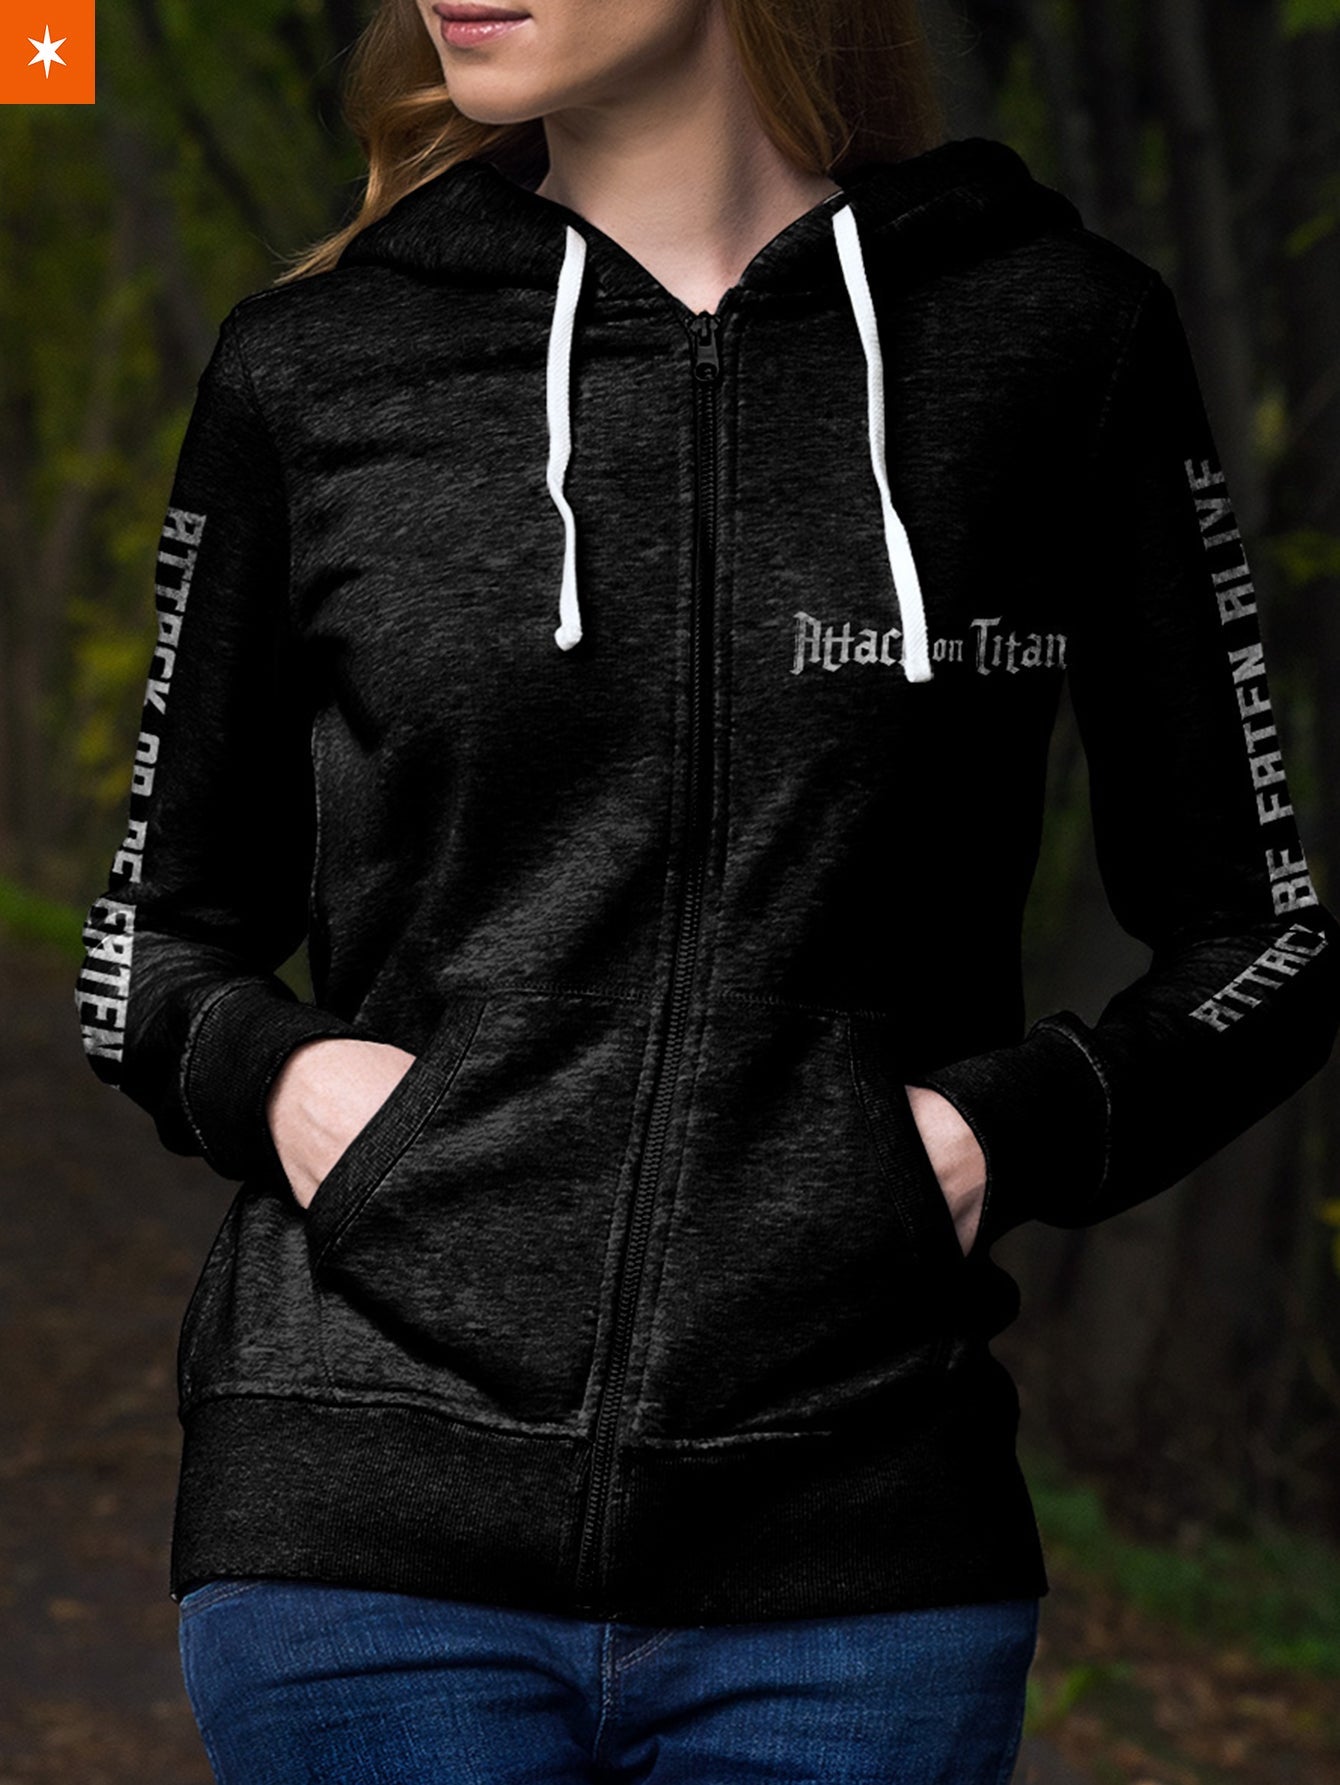 Fandomaniax - Attack Or Be Eaten Alive Unisex Zipped Hoodie